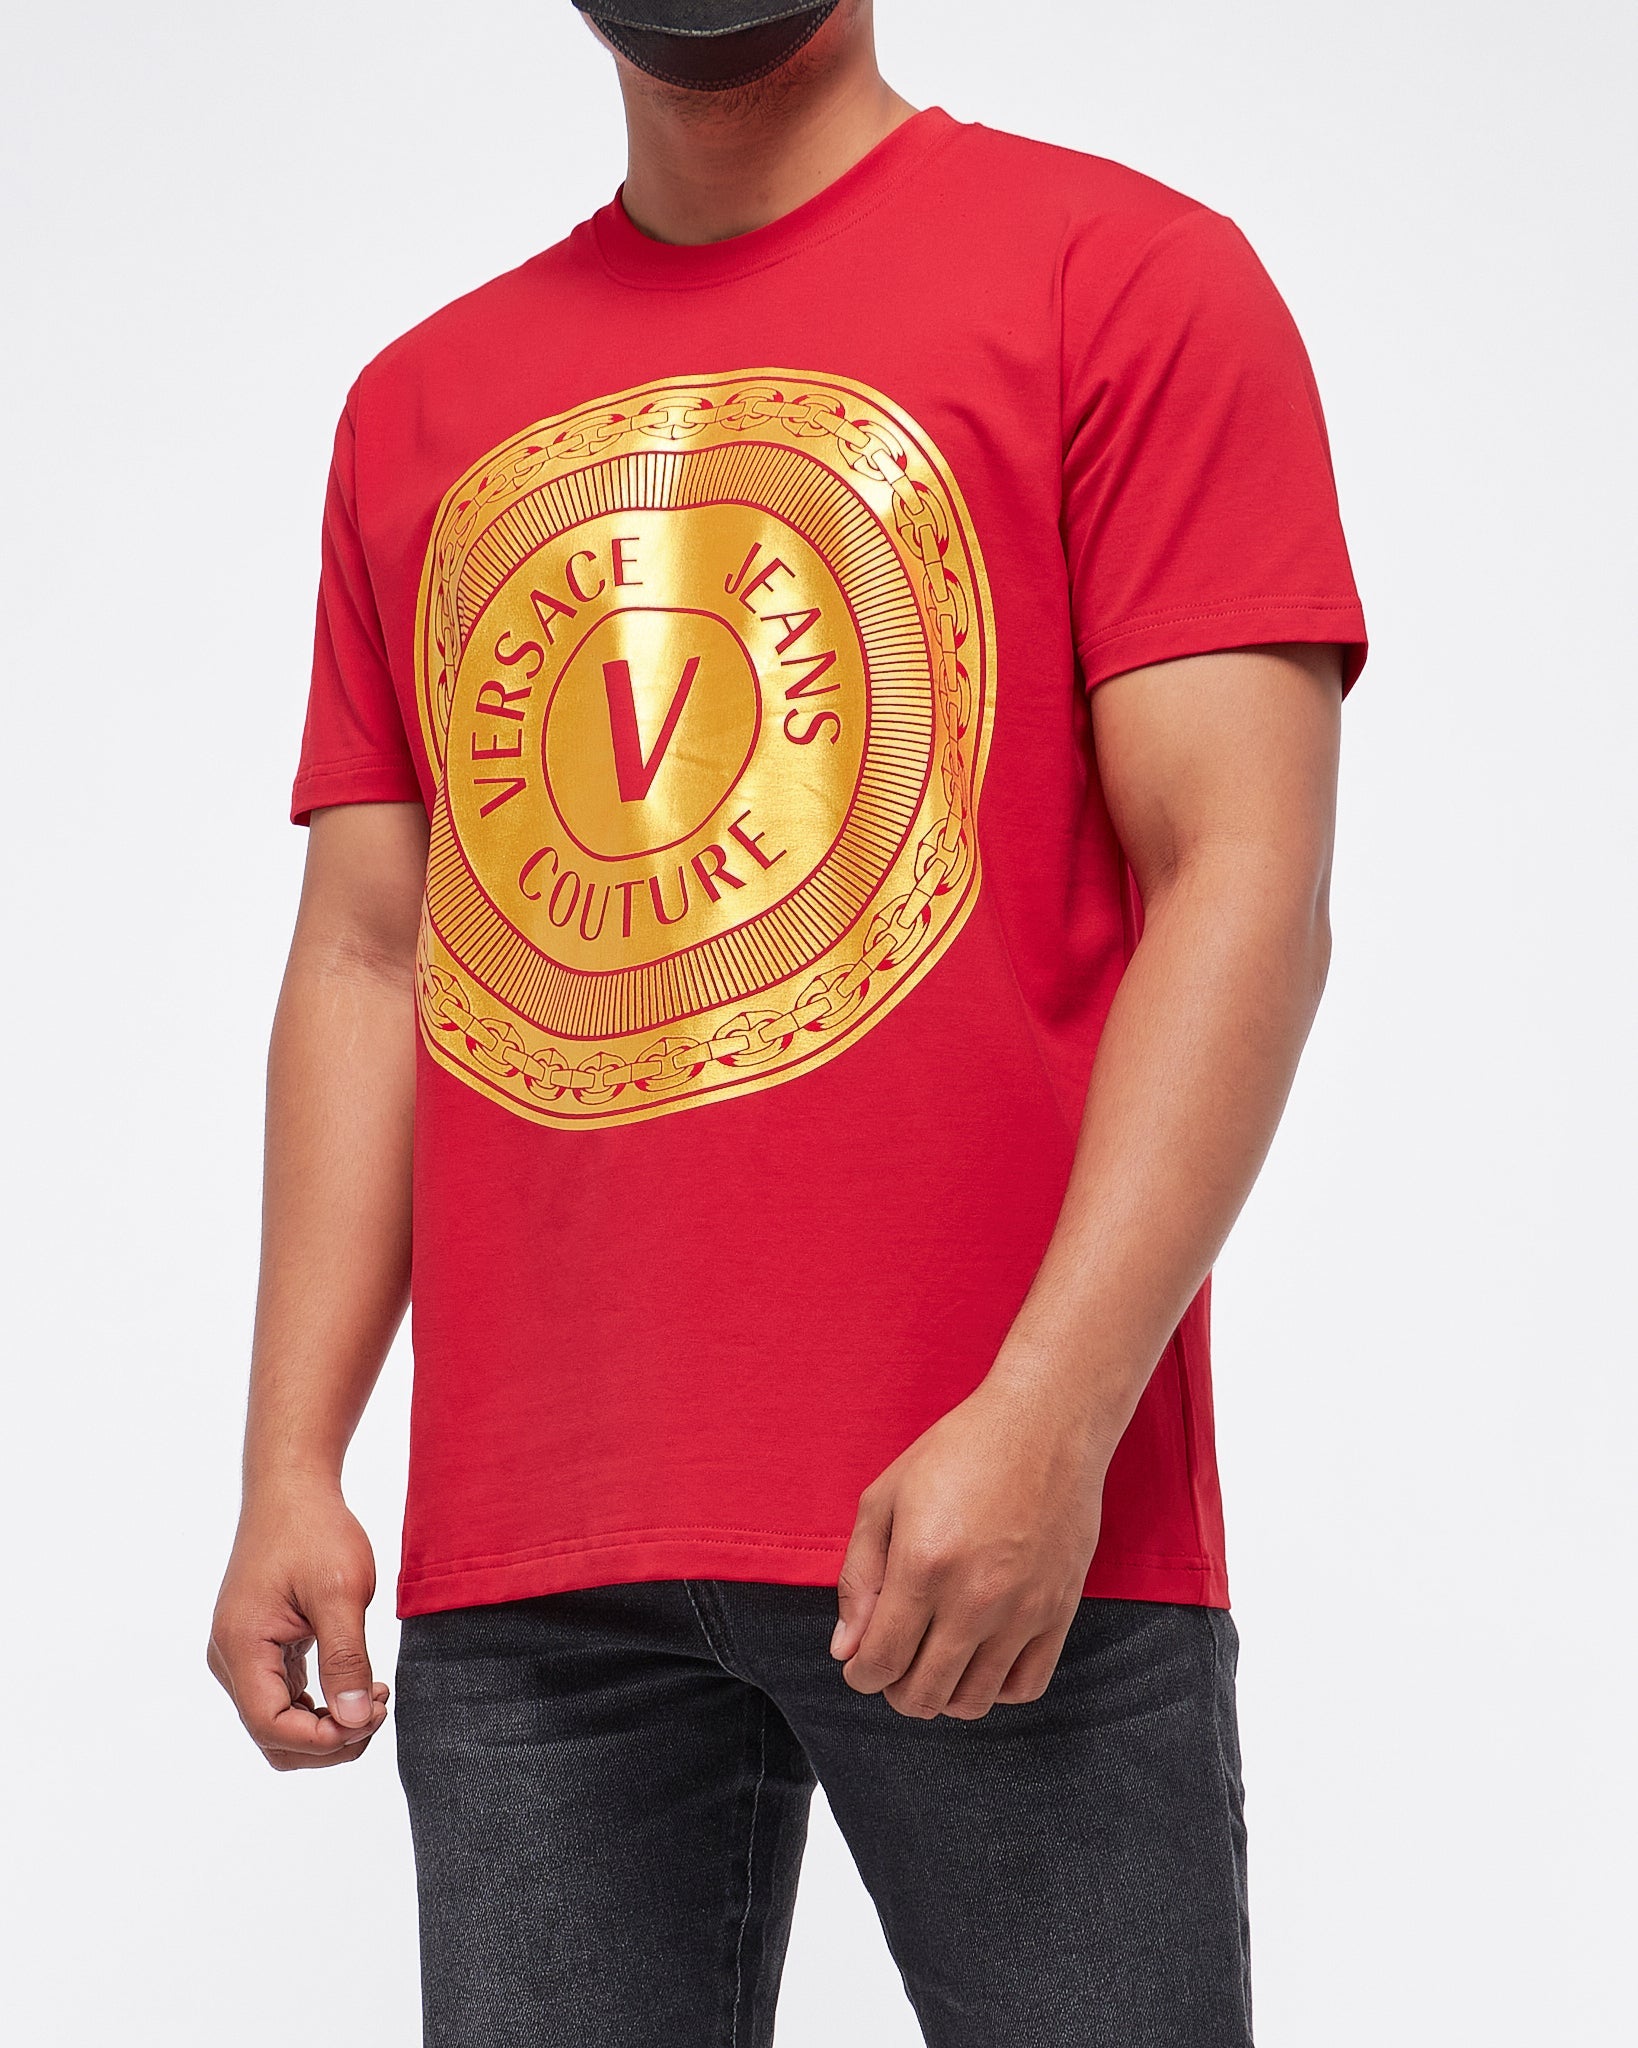 MOI OUTFIT-Round V Couture Gold Men T-Shirt 15.90